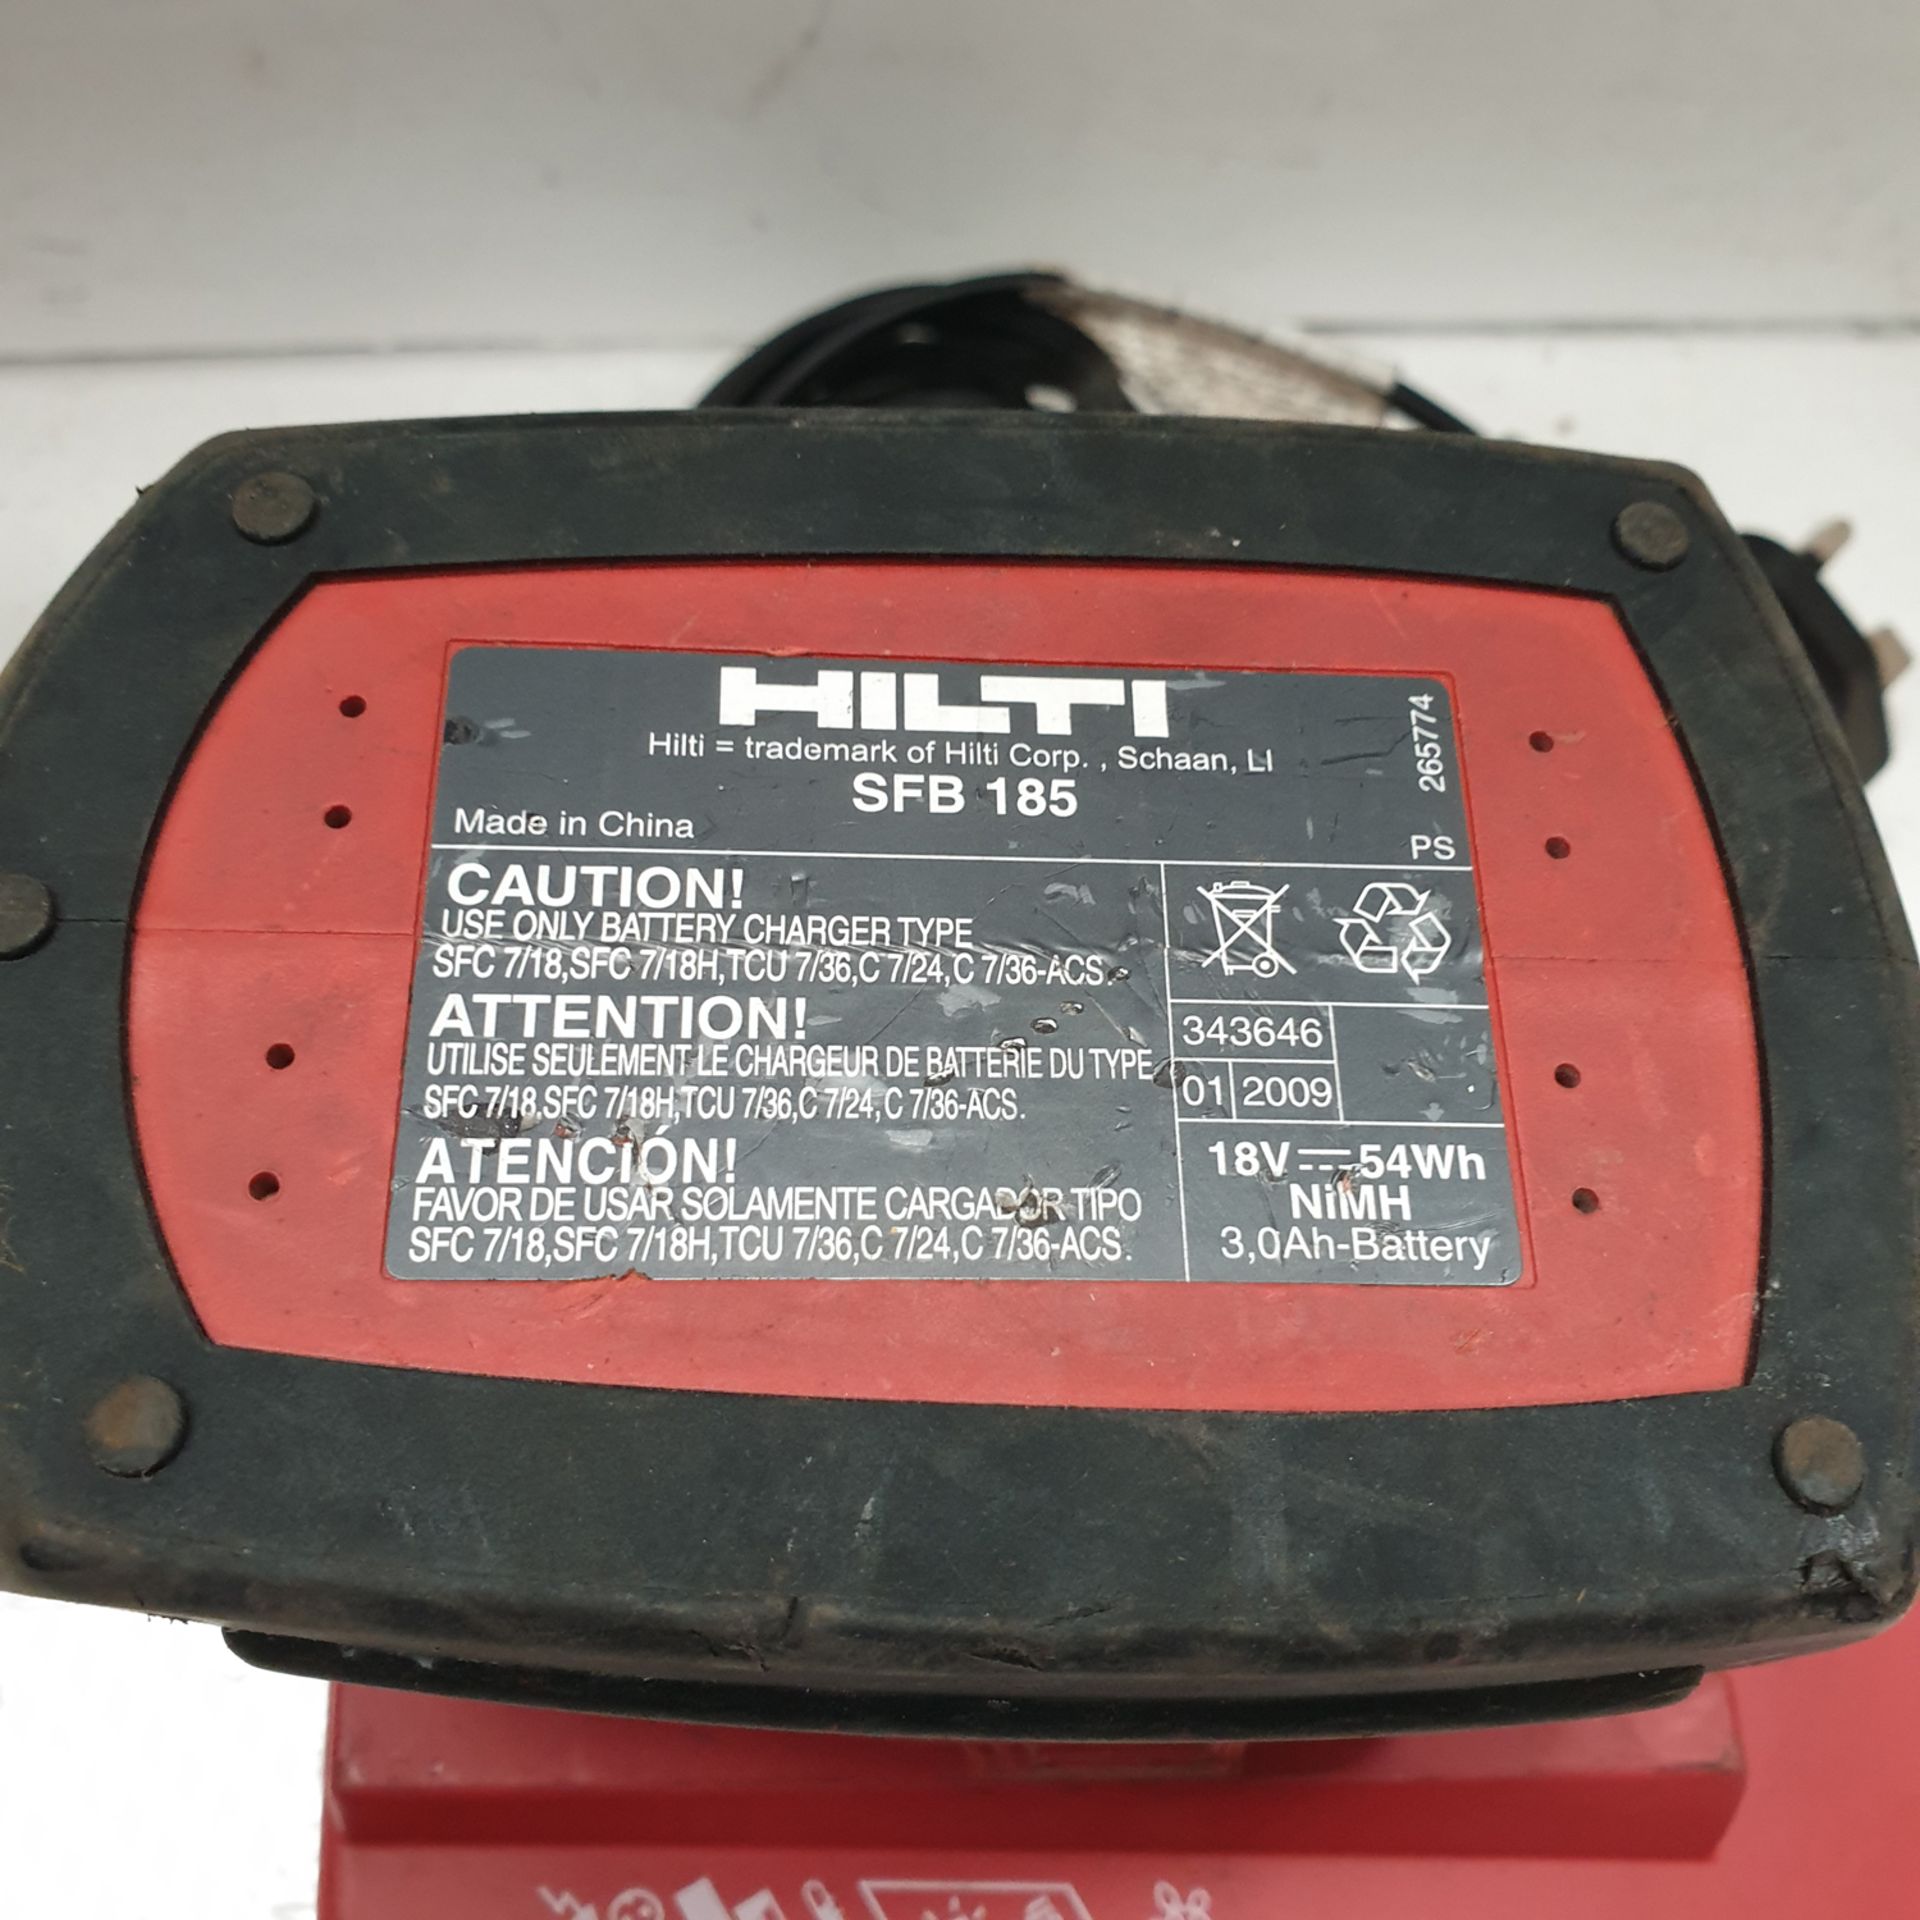 HILTI C7/24 Battery Charger. With 2 Batteries. - Image 2 of 3